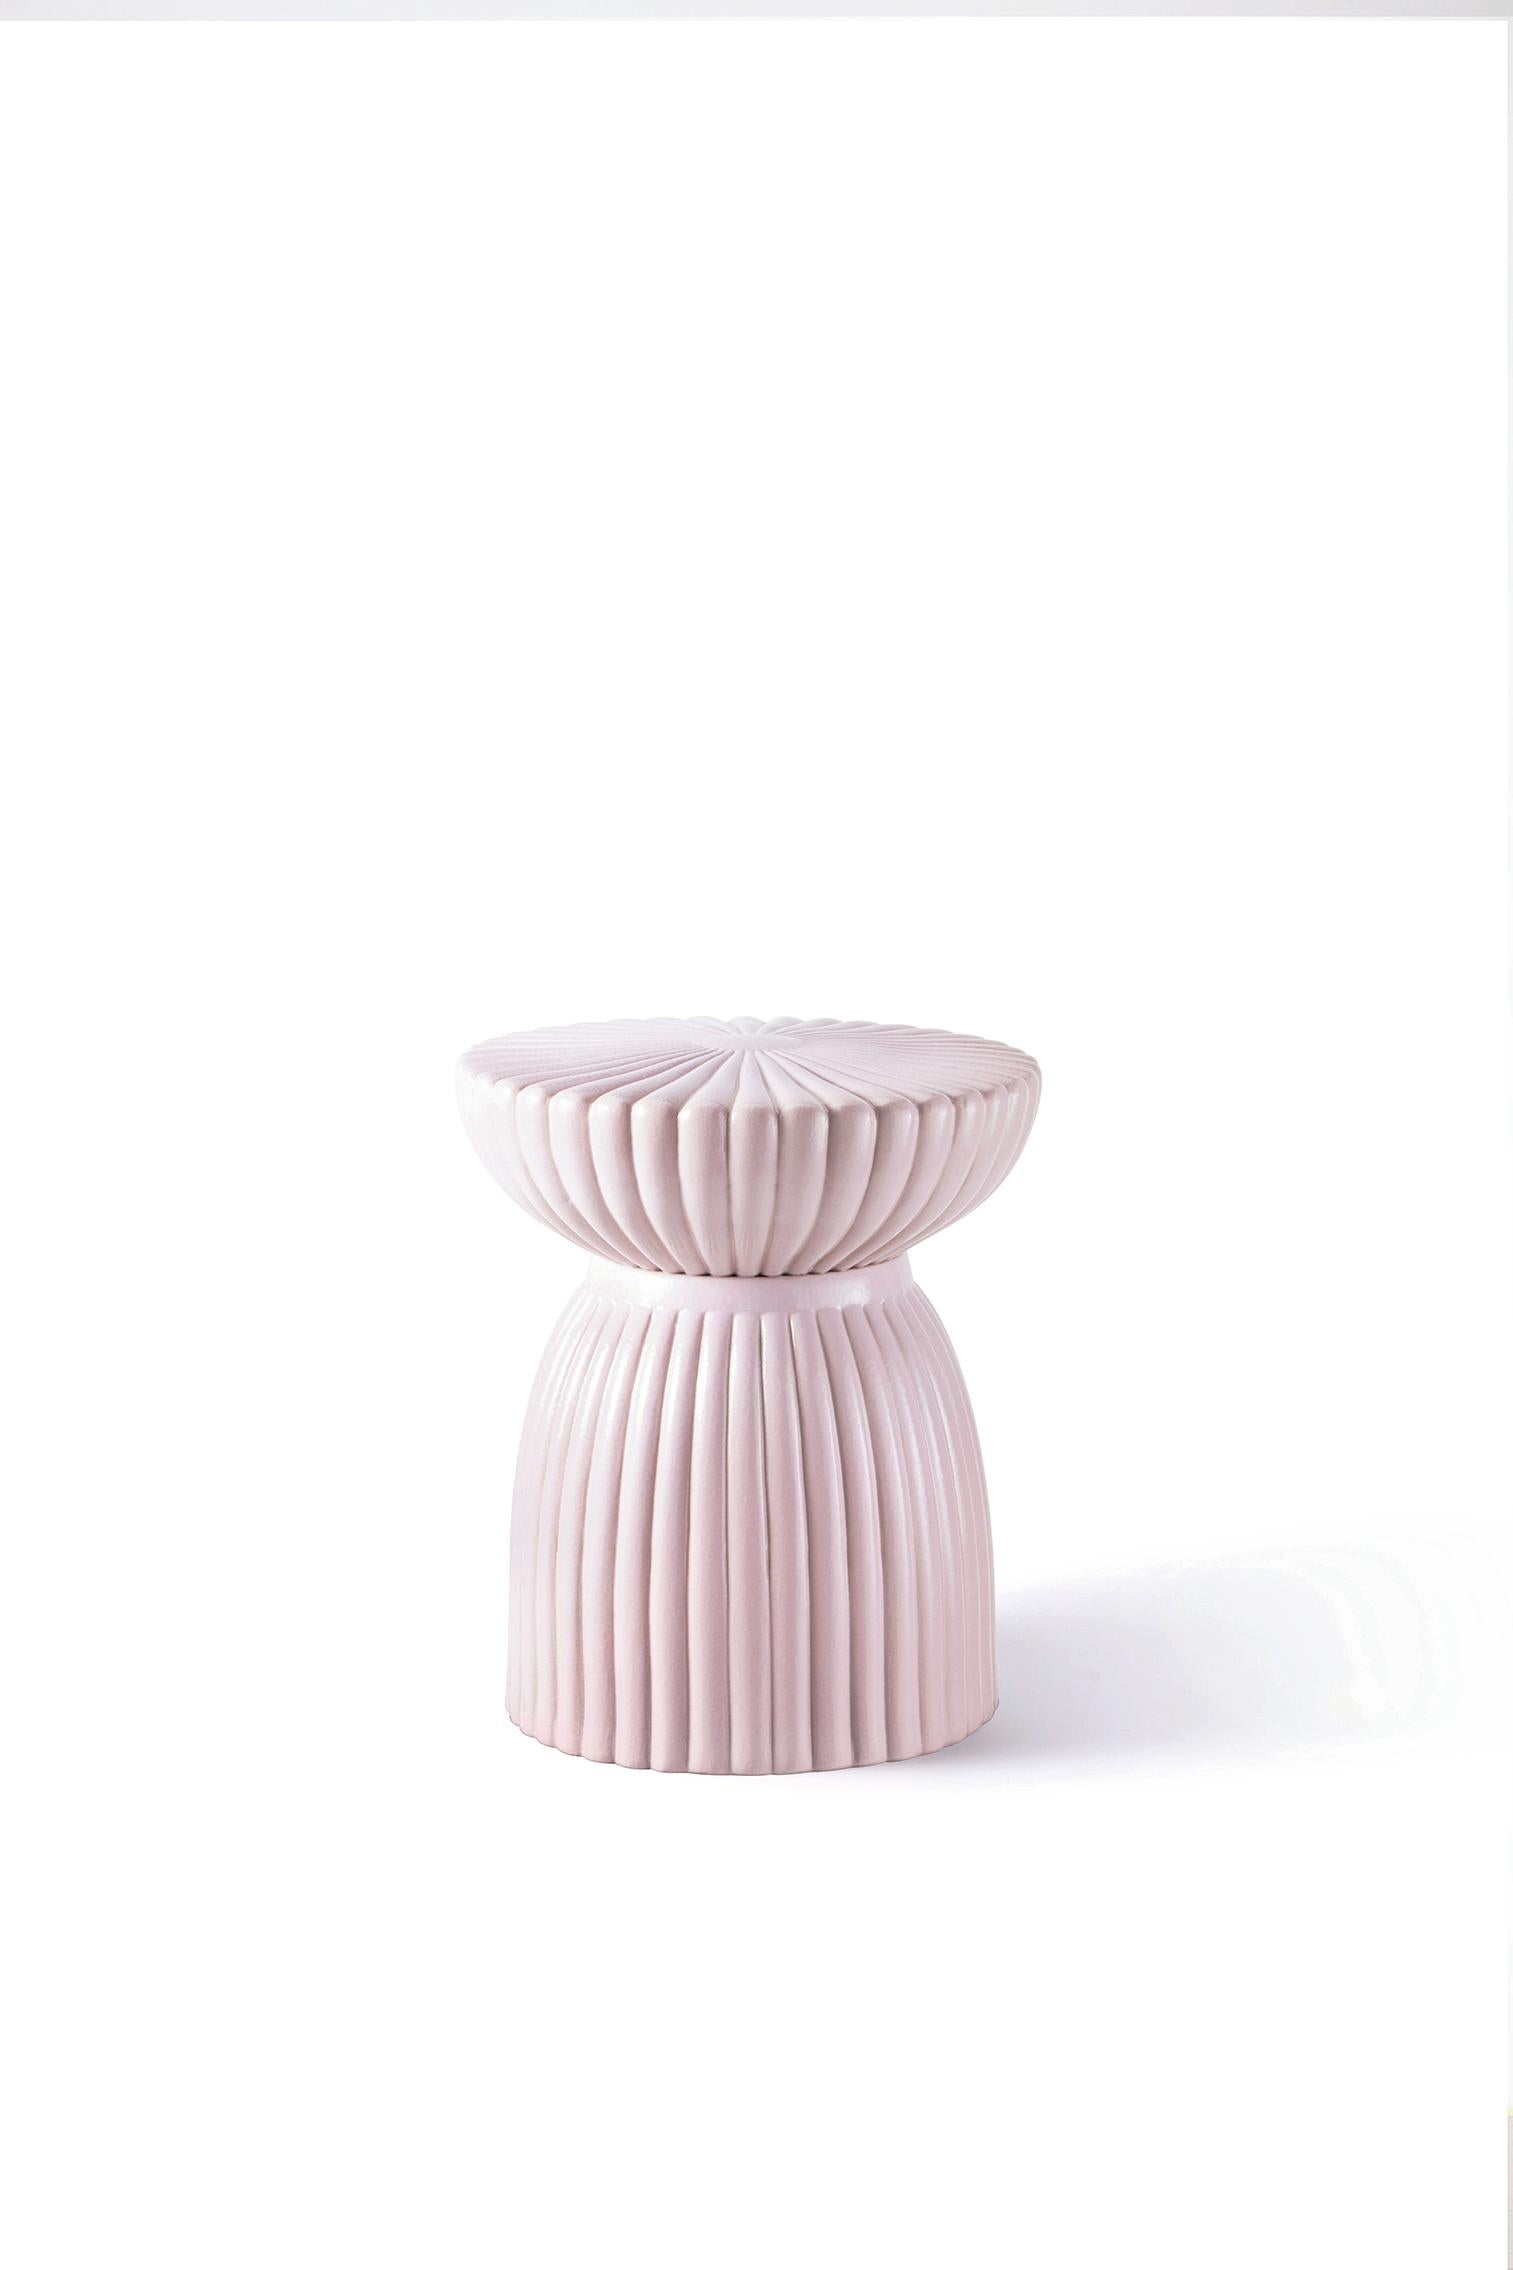 Glossy ceramic stool/gueridon designed by Thomas Dariel, Maison Dada
Measures: Diameter 41.2 * Height 45 cm
Ceramic in glossy black, blue or pink glaze finish
The name of this piece has been chosen as a nod to Guy de Maupassant’s famous character